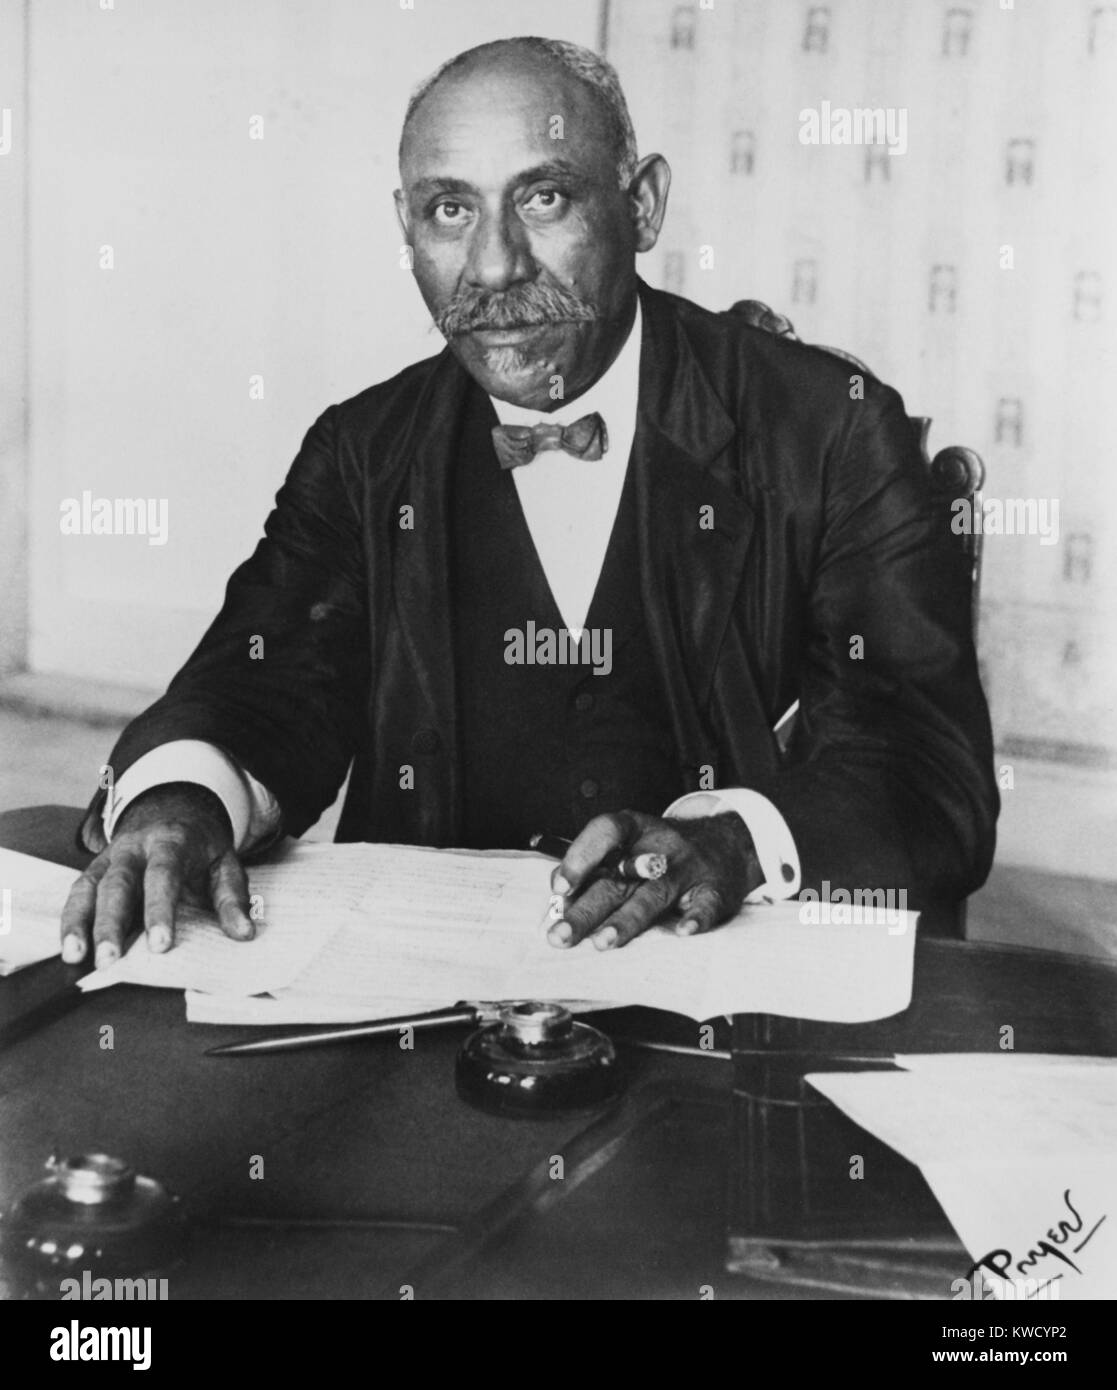 Philippe Sudre Dartiguenave, President of Haiti from August 1915 to May 1922. The election of the pro-American President was forced on the Haitian legislature in August 1915. (BSLOC 2017 2 78) Stock Photo